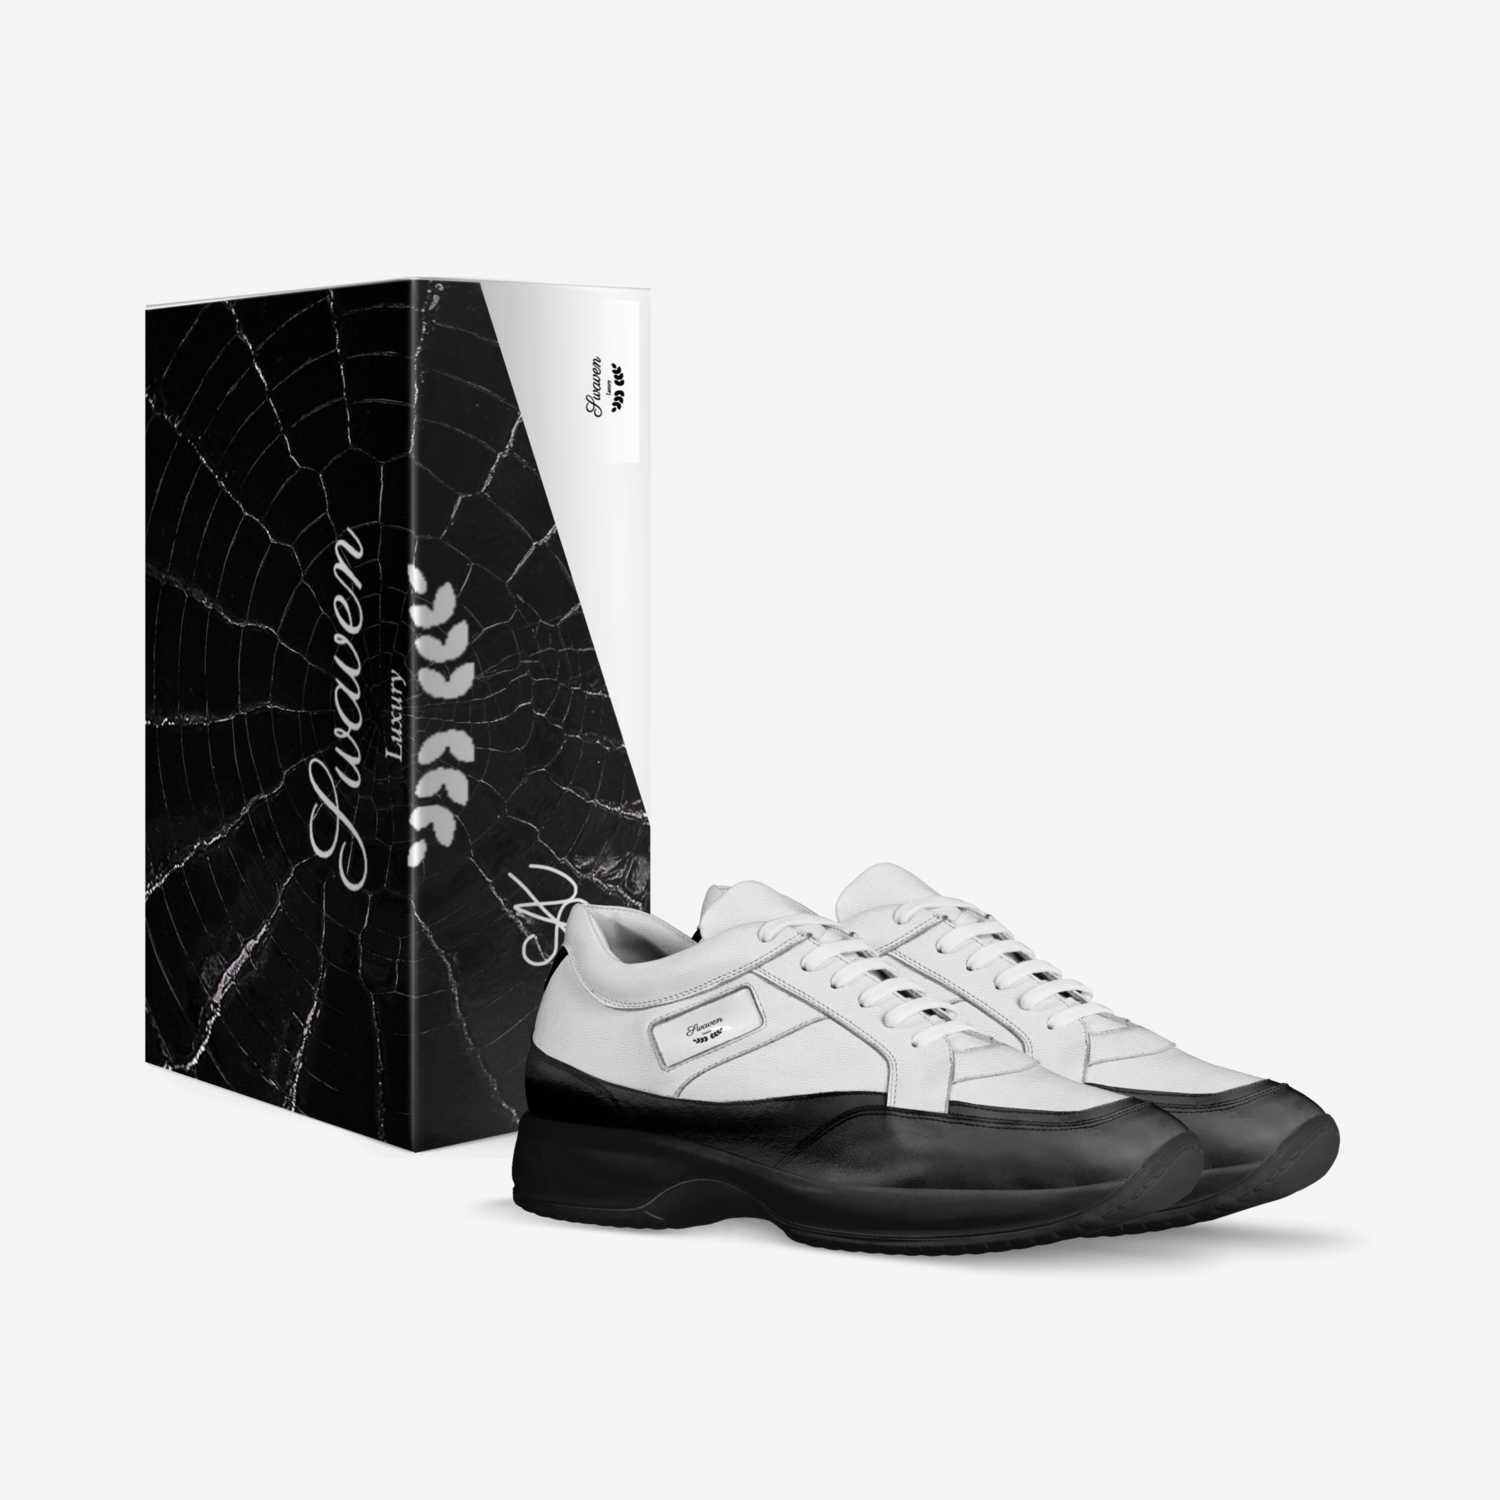 Swaven two-tone custom made in Italy shoes by Stephen Amos | Box view